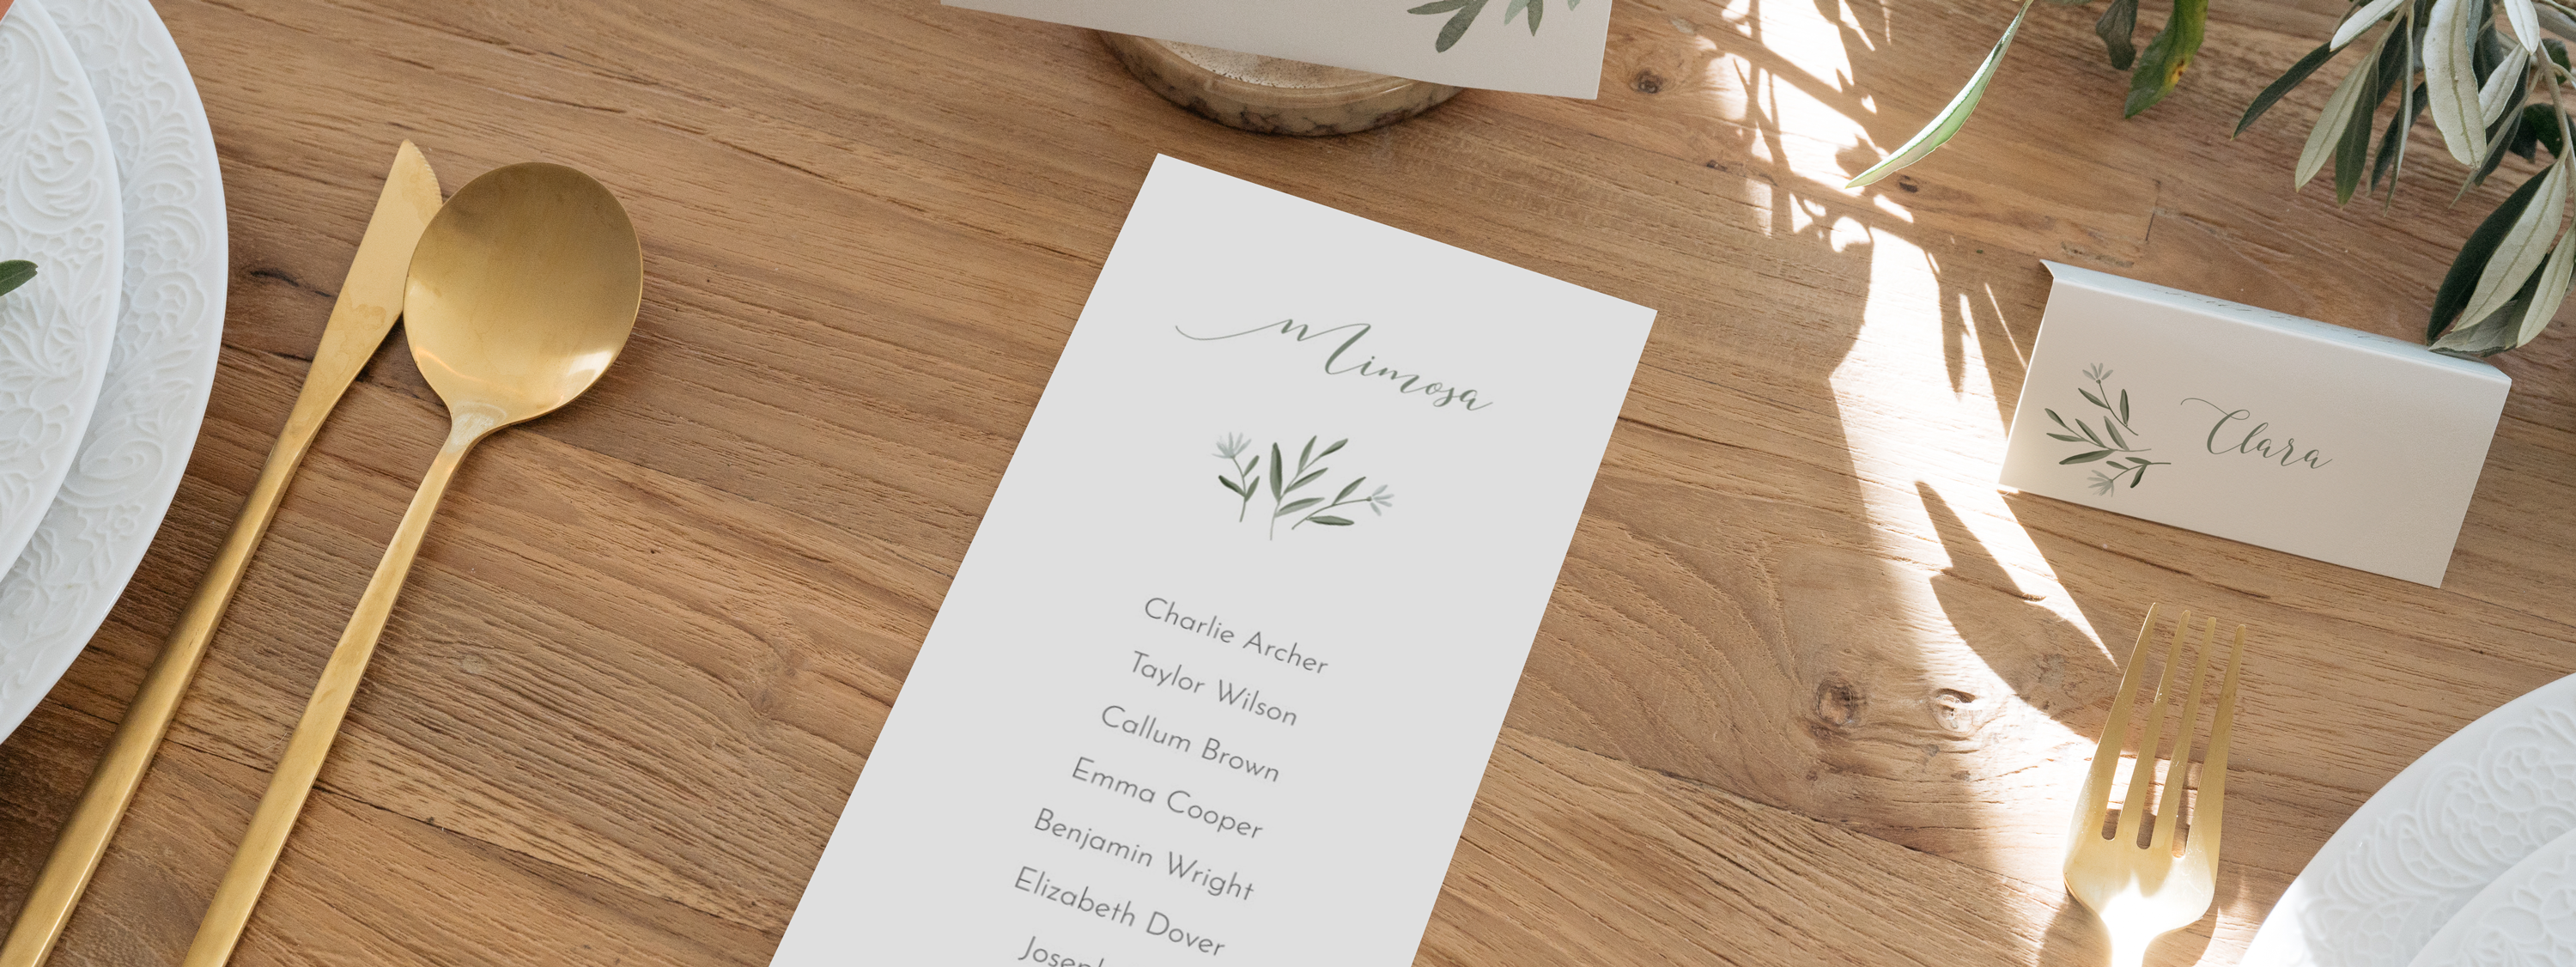 Floral Wedding Table Plan Cards